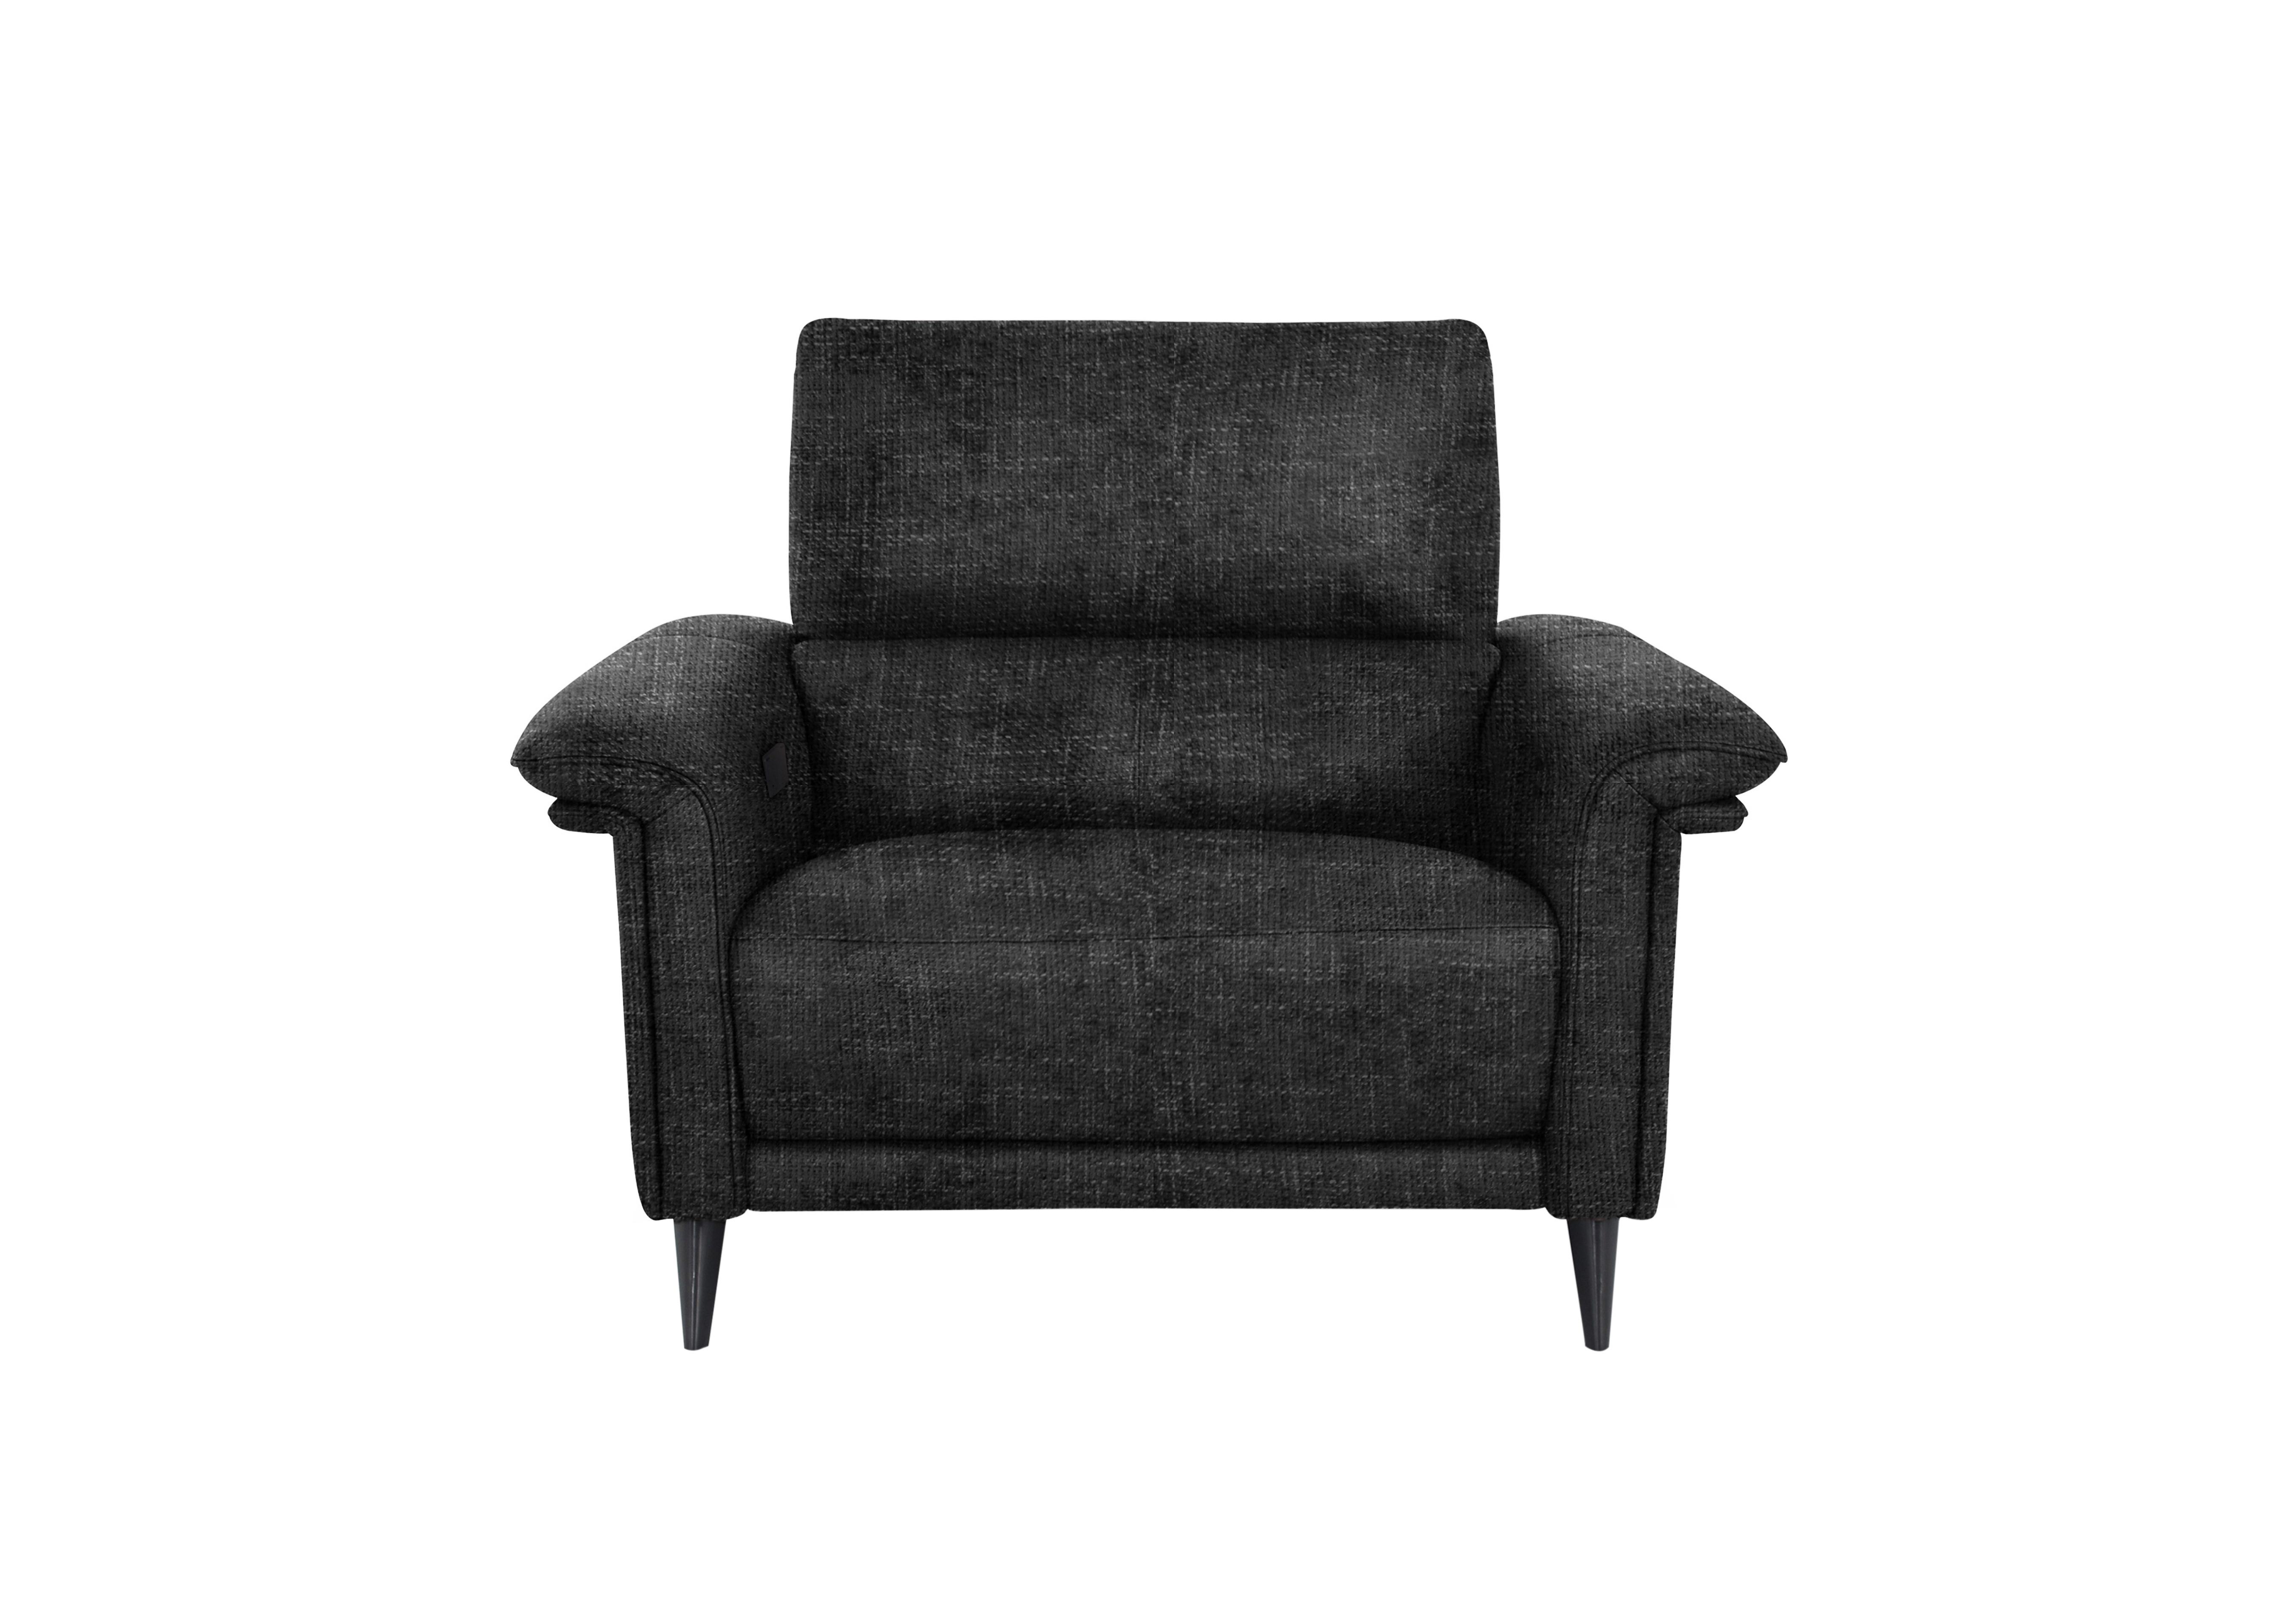 Huxley Fabric Chair in Fab-Cac-R463 Black Mica on Furniture Village